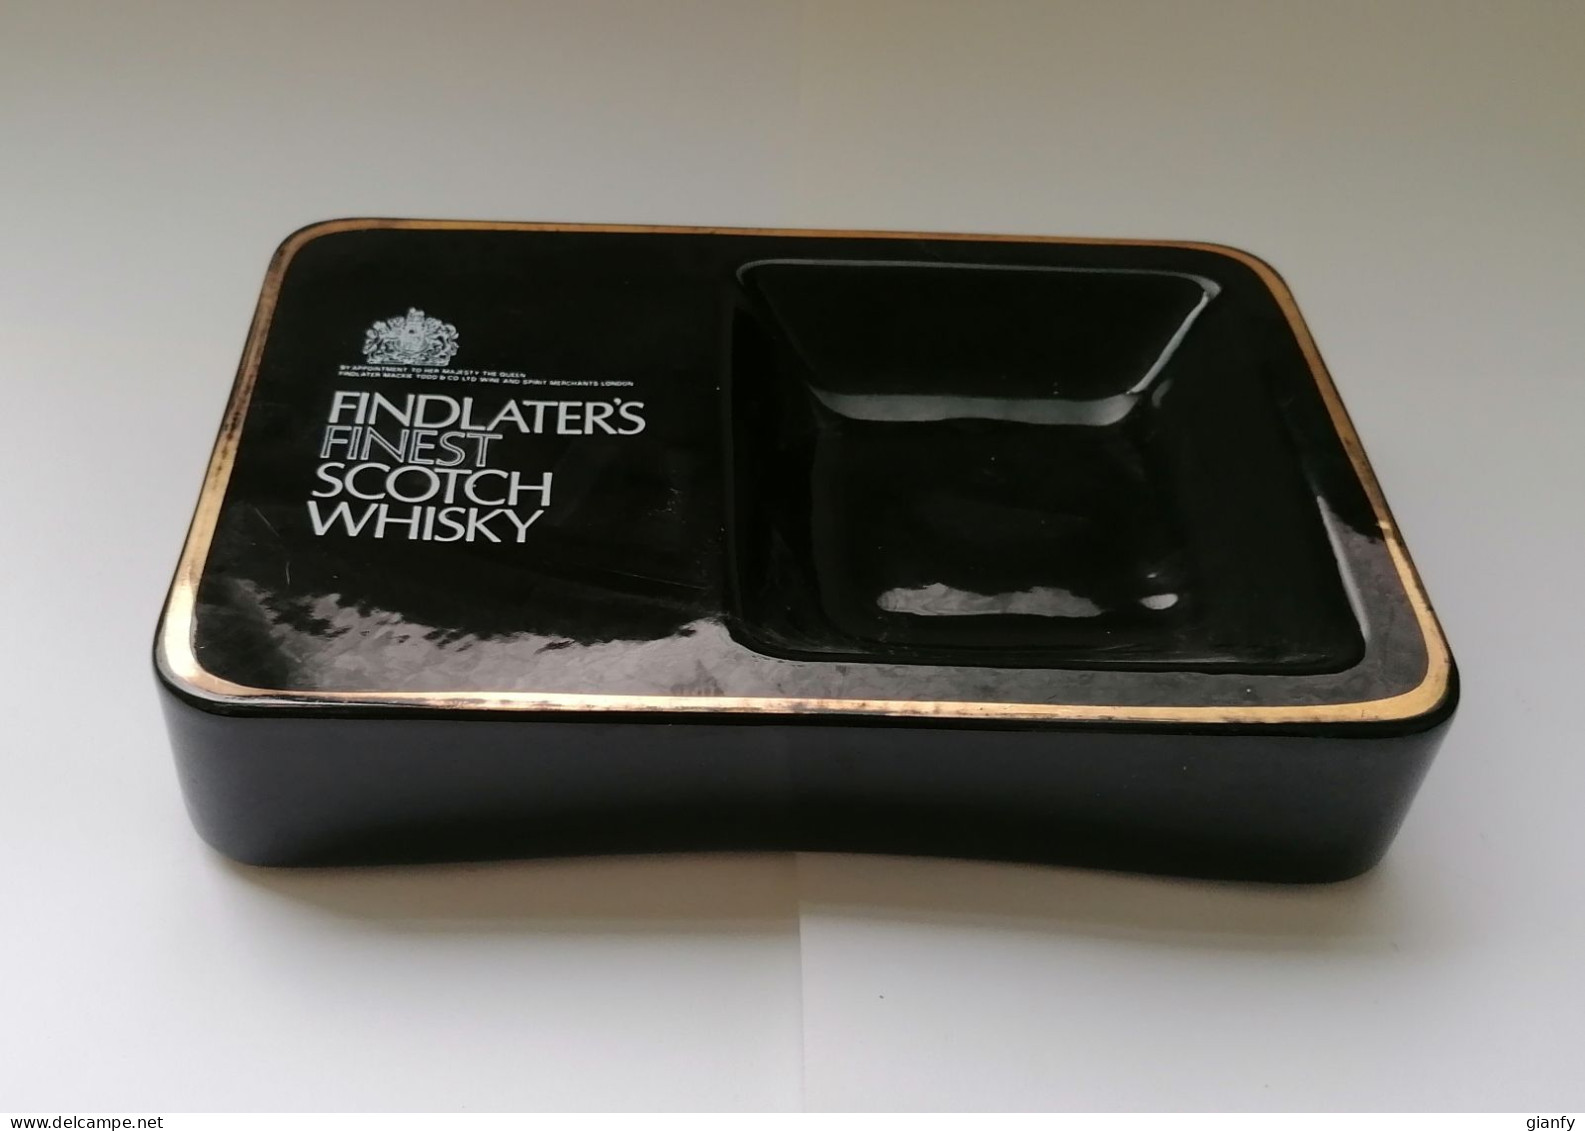 POSACENERE IN CERAMICA PUBBLICITA "FINDLATER'S" FINEST SCOTCH WHISKY 1990 ASHTRAY ADVERTISING MADE IN ENGLAND - Porzellan